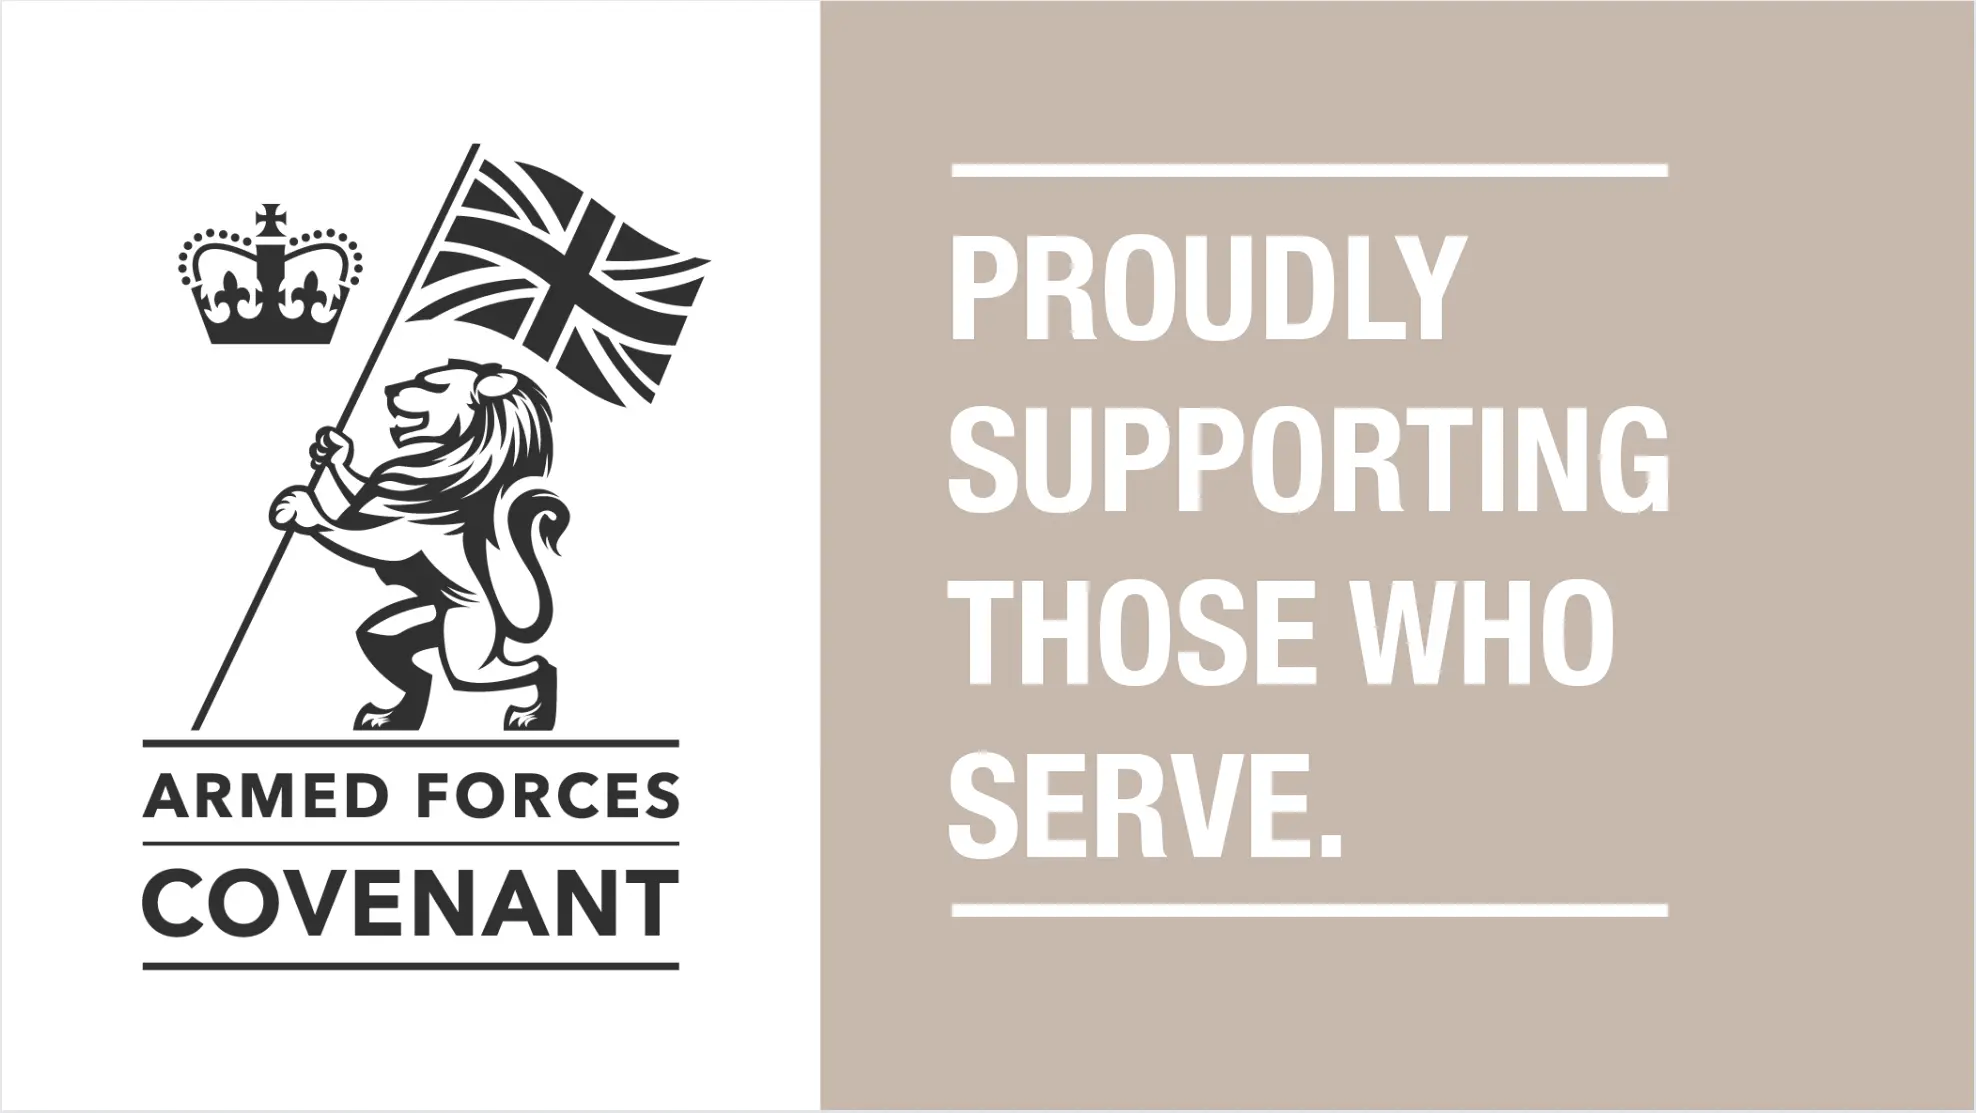 Armed Forces Covenant - Proudly supporting those who serve. 